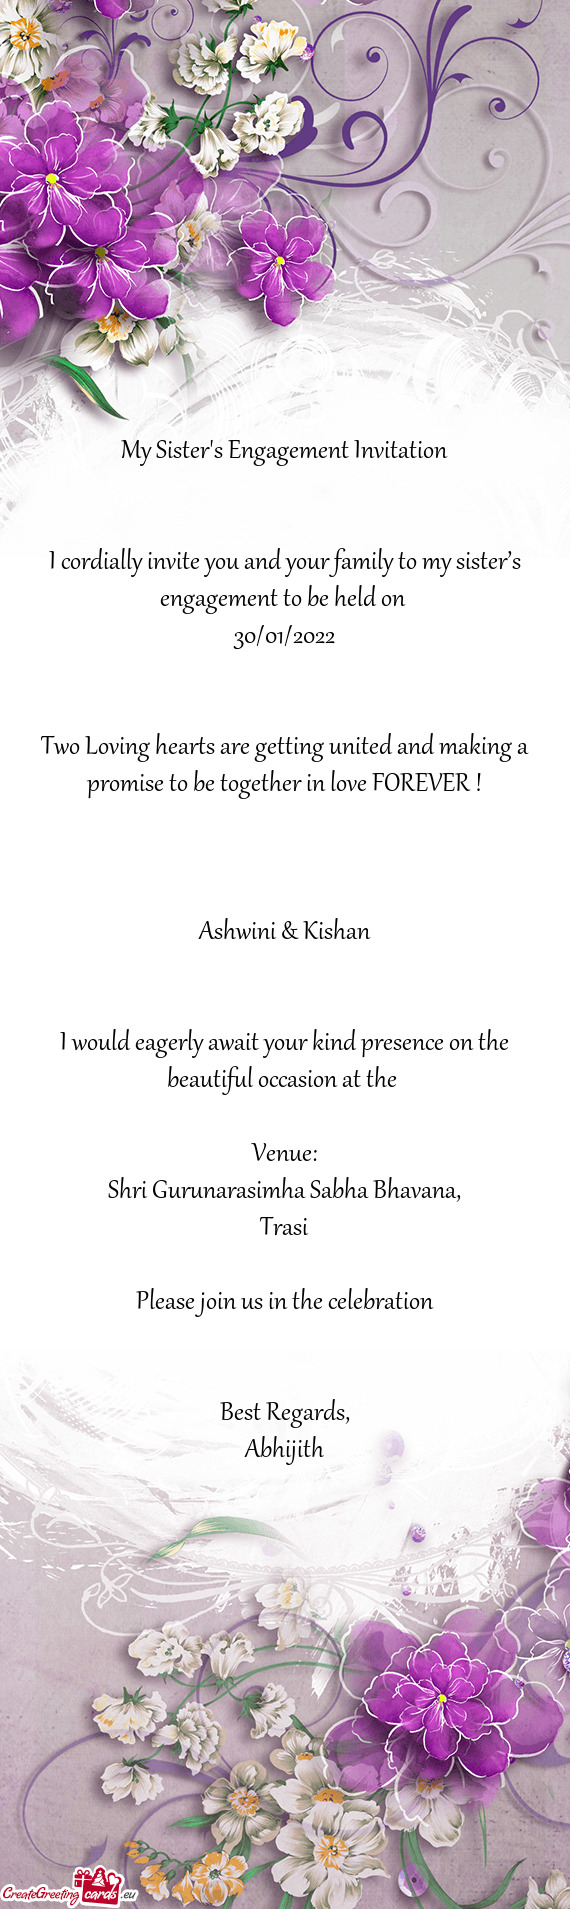 Ement to be held on 
 30/01/2022
 
 
 Two Loving hearts are getting united and making a promise to